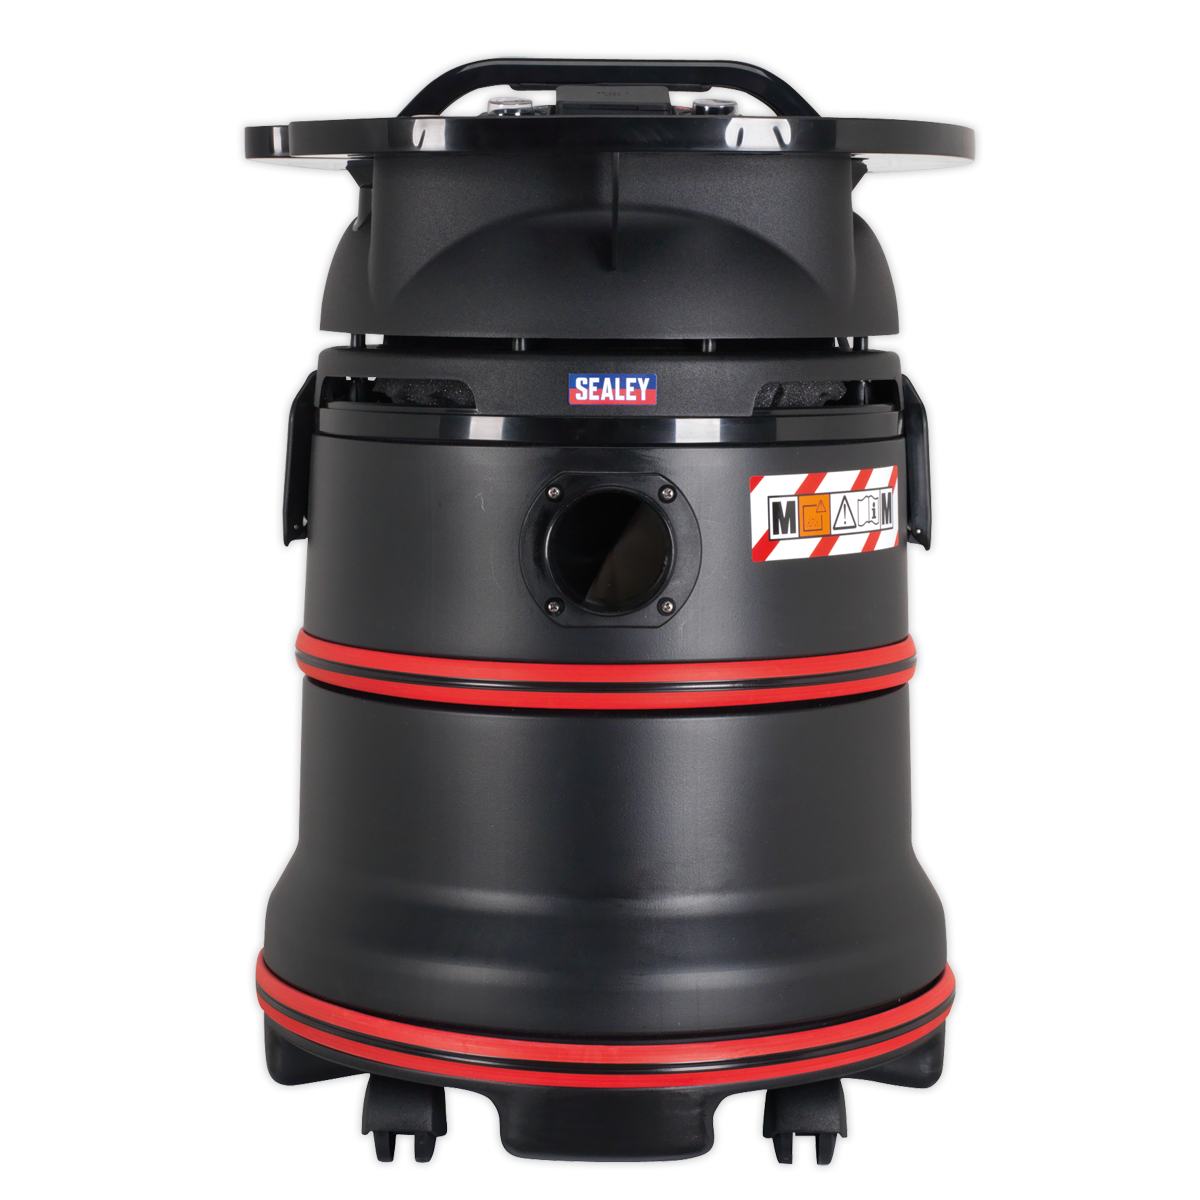 Vacuum Cleaner Industrial Wet/Dry 35L 1200W/230V Plastic Drum M Class Filtration Self-Clean Filter - PC35230V - Farming Parts